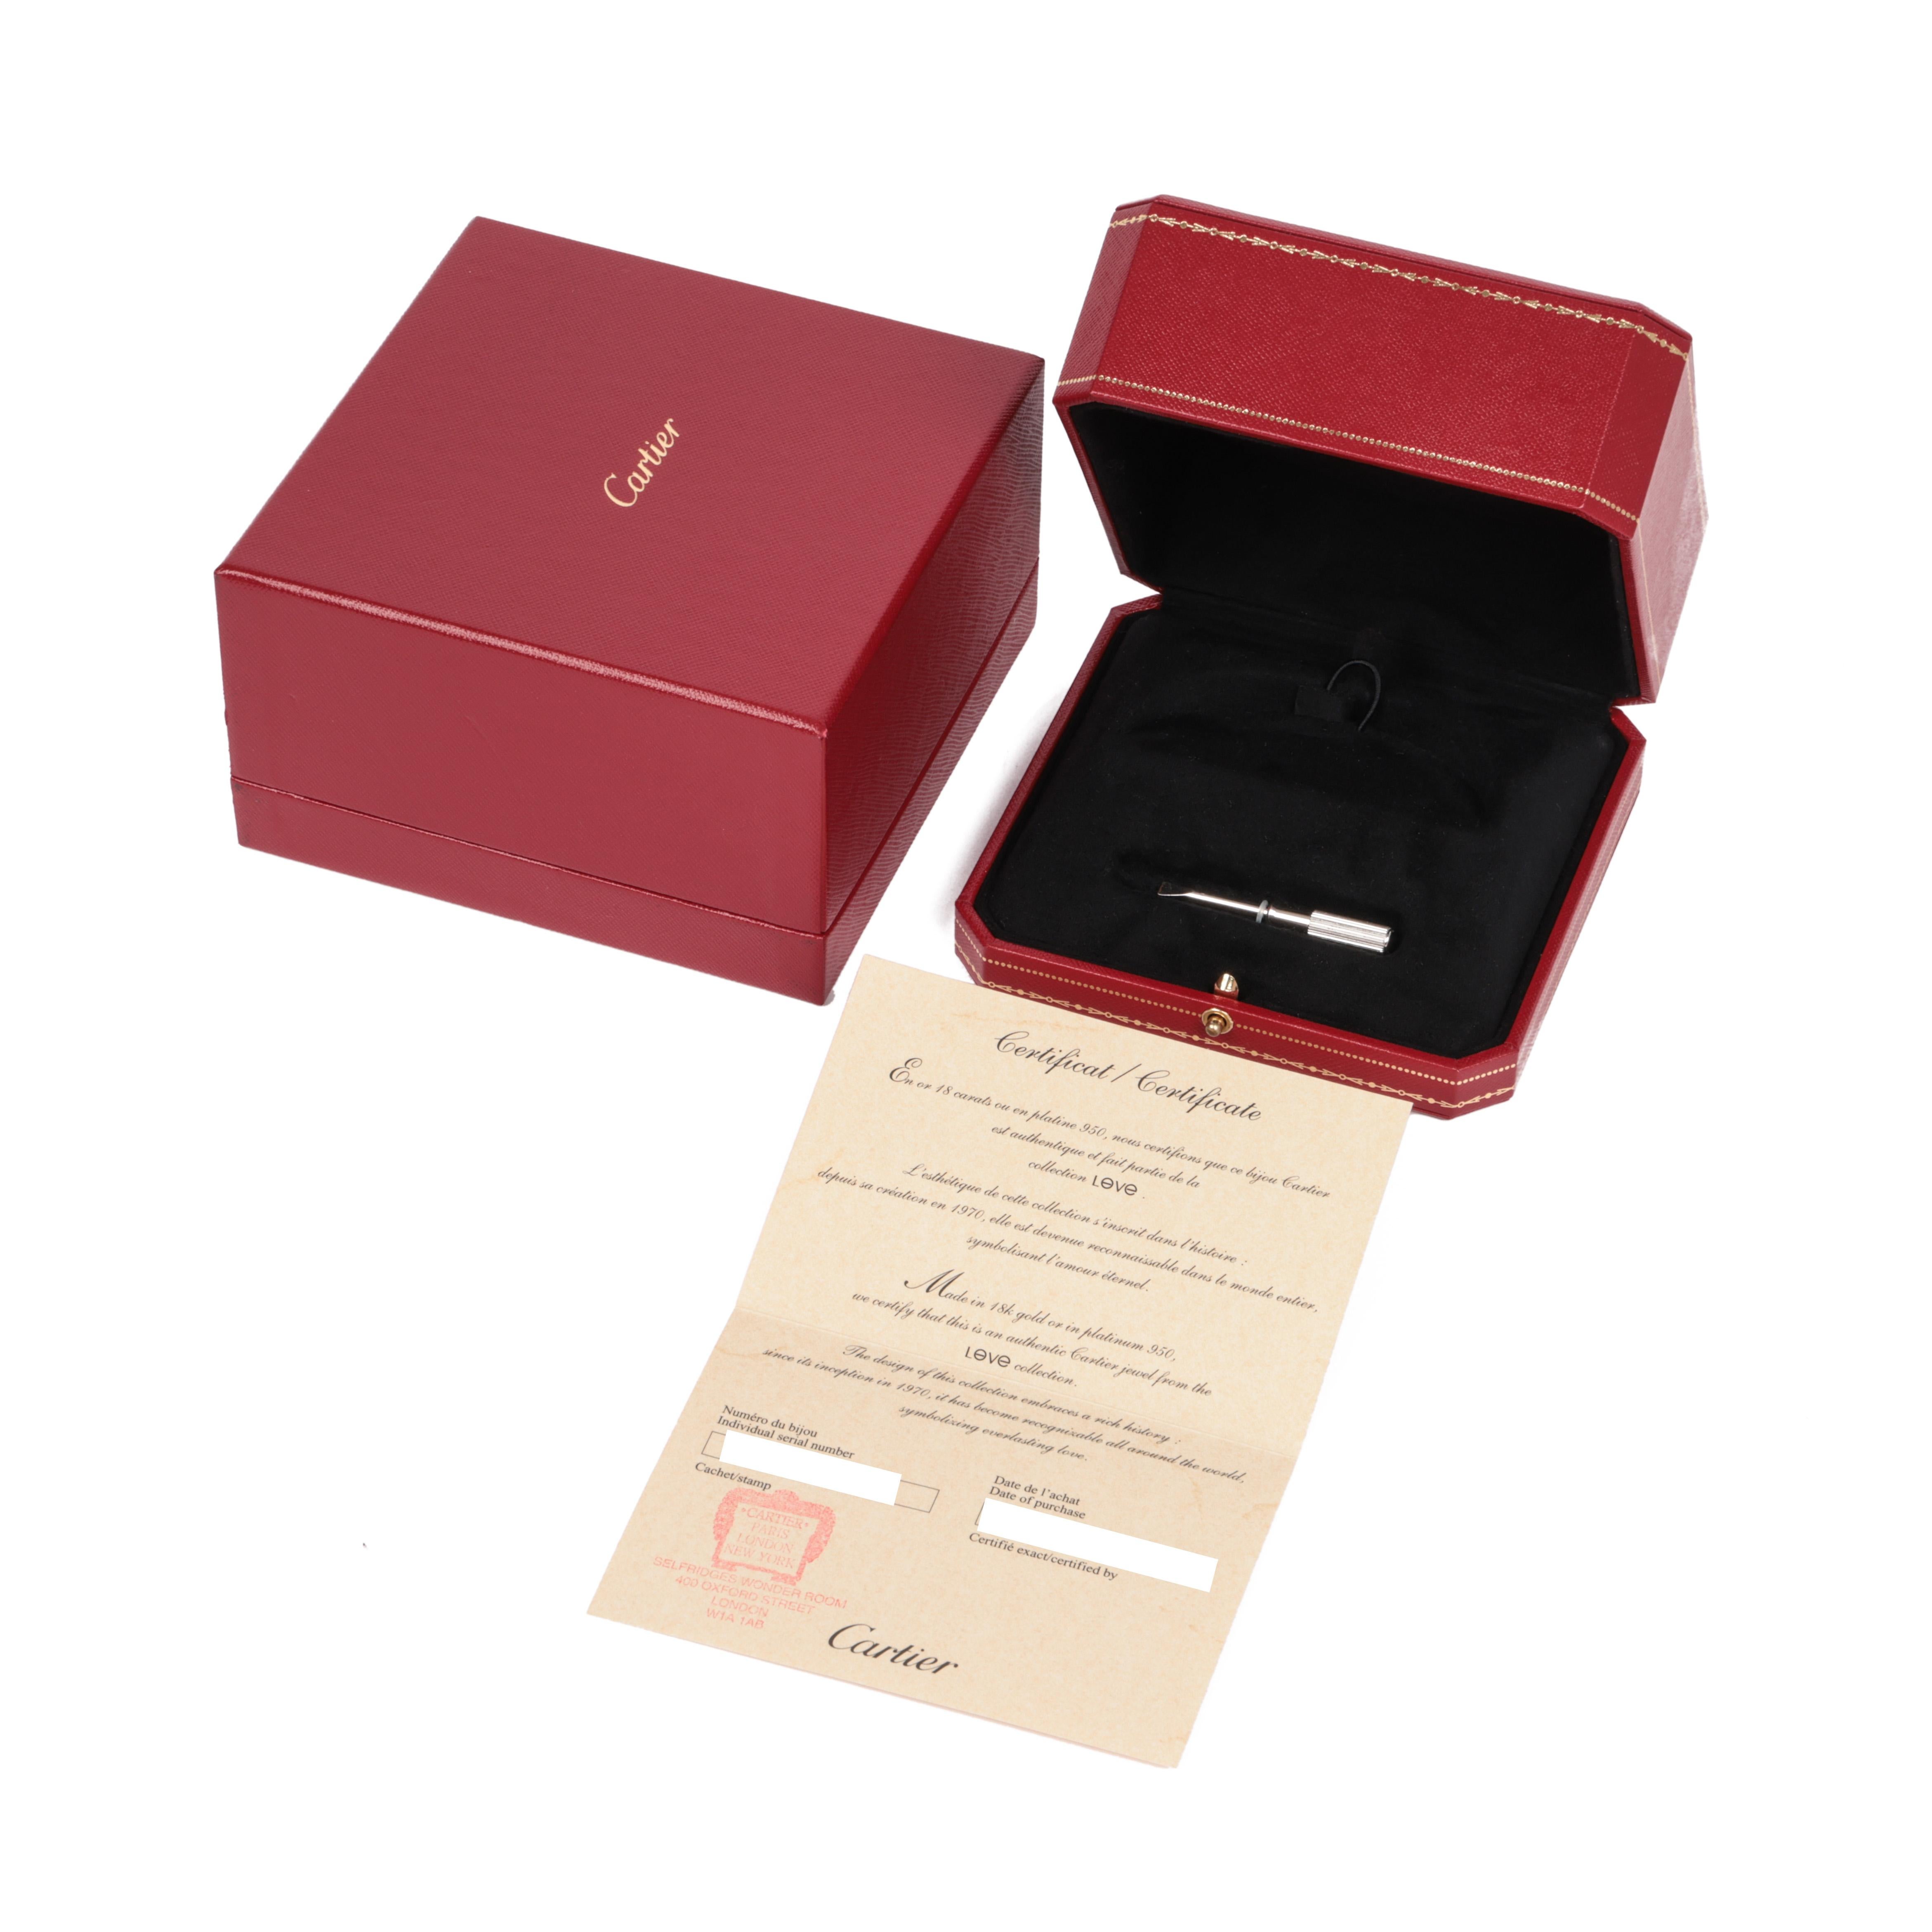 RRP	£7,100
ITEM CONDITION	Excellent
XUPES REFERENCE	J1123
MANUFACTURER	Cartier
MODEL	Love
MODEL REFERENCE	B6067617
AGE	2018
GENDER	Women's
ACCOMPANIED BY	Cartier Box, Certificate & Service Papers
BRACELET WIDTH	5.7mm
BRACELET LENGTH	20cm
TOTAL